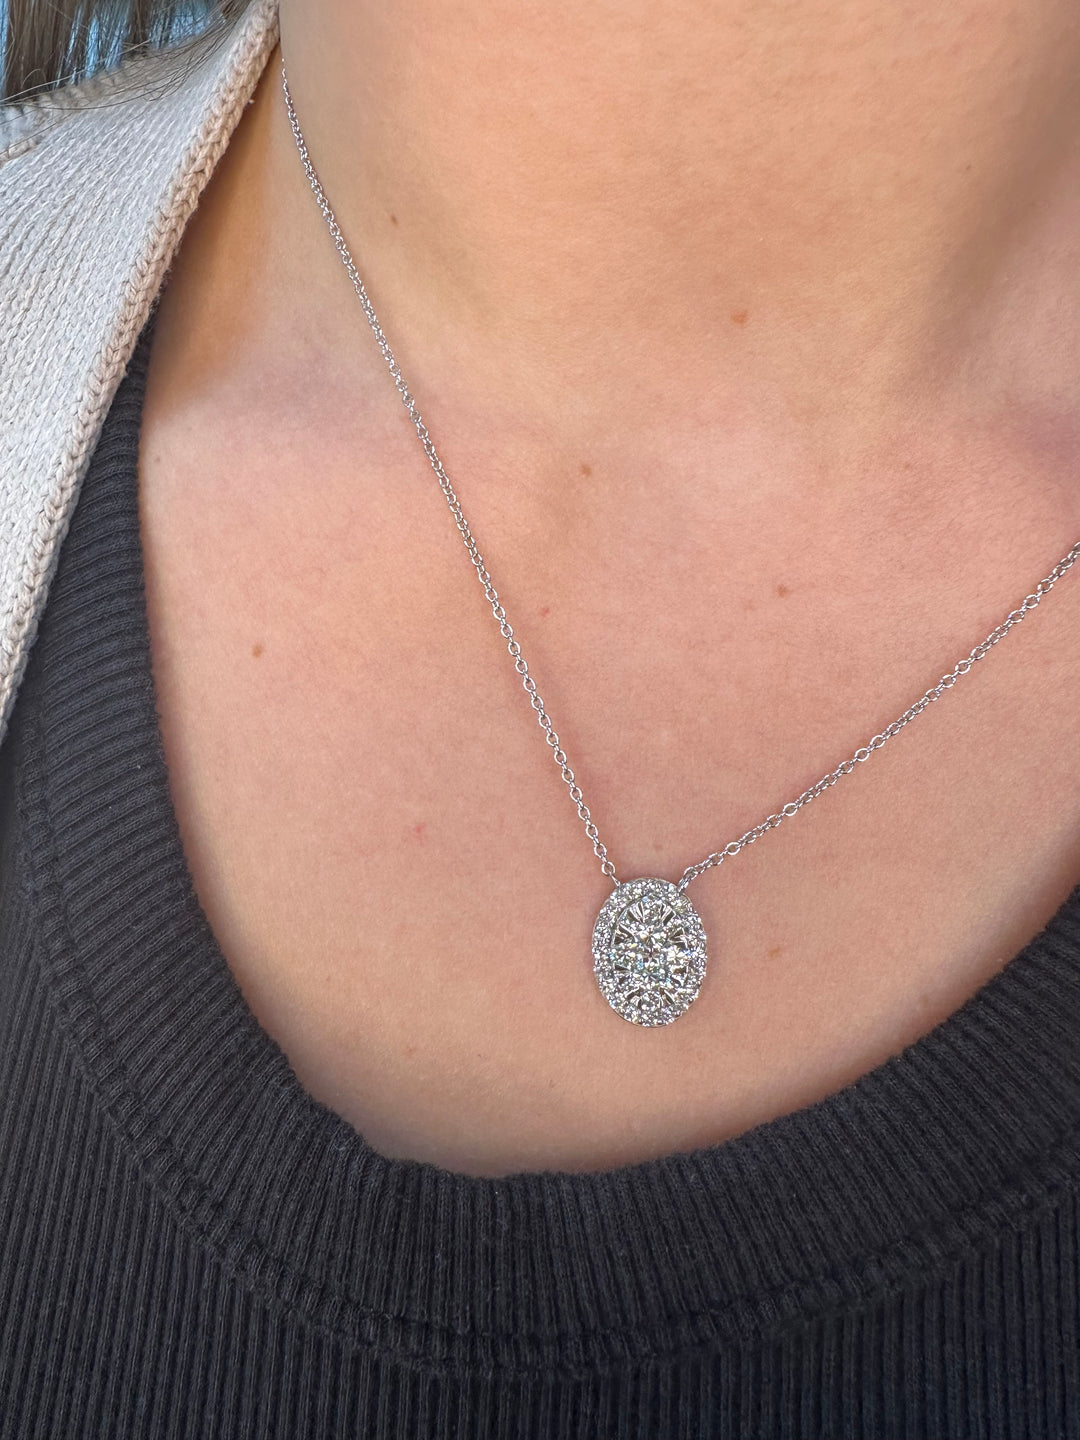 oval-shape-diamond-pendant-necklace-in-white-gold